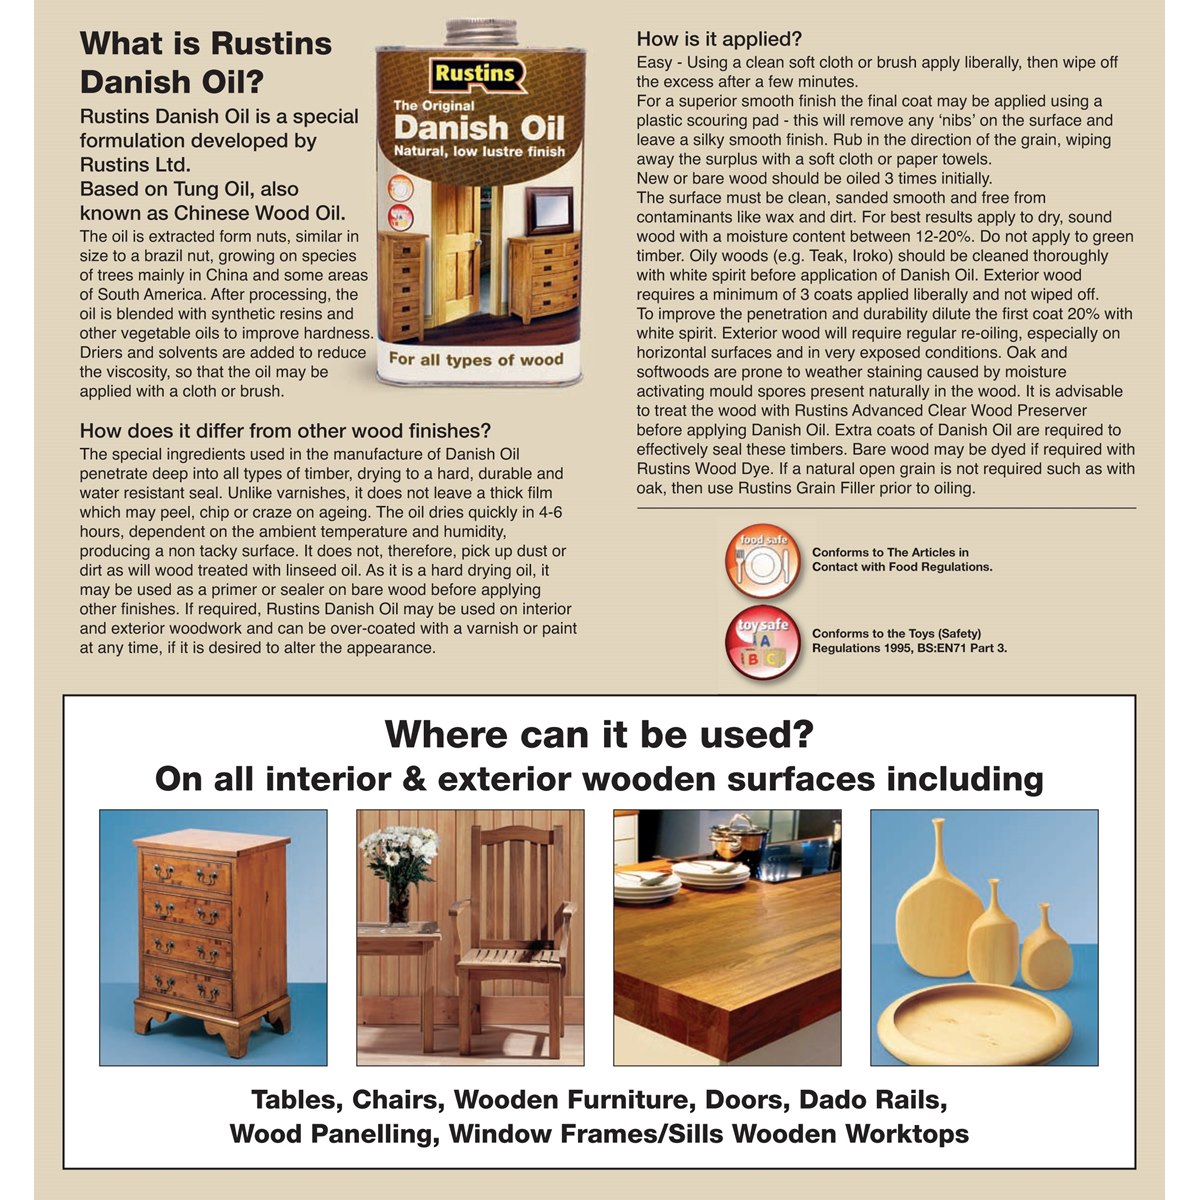 How to use Rustins Danish Oil